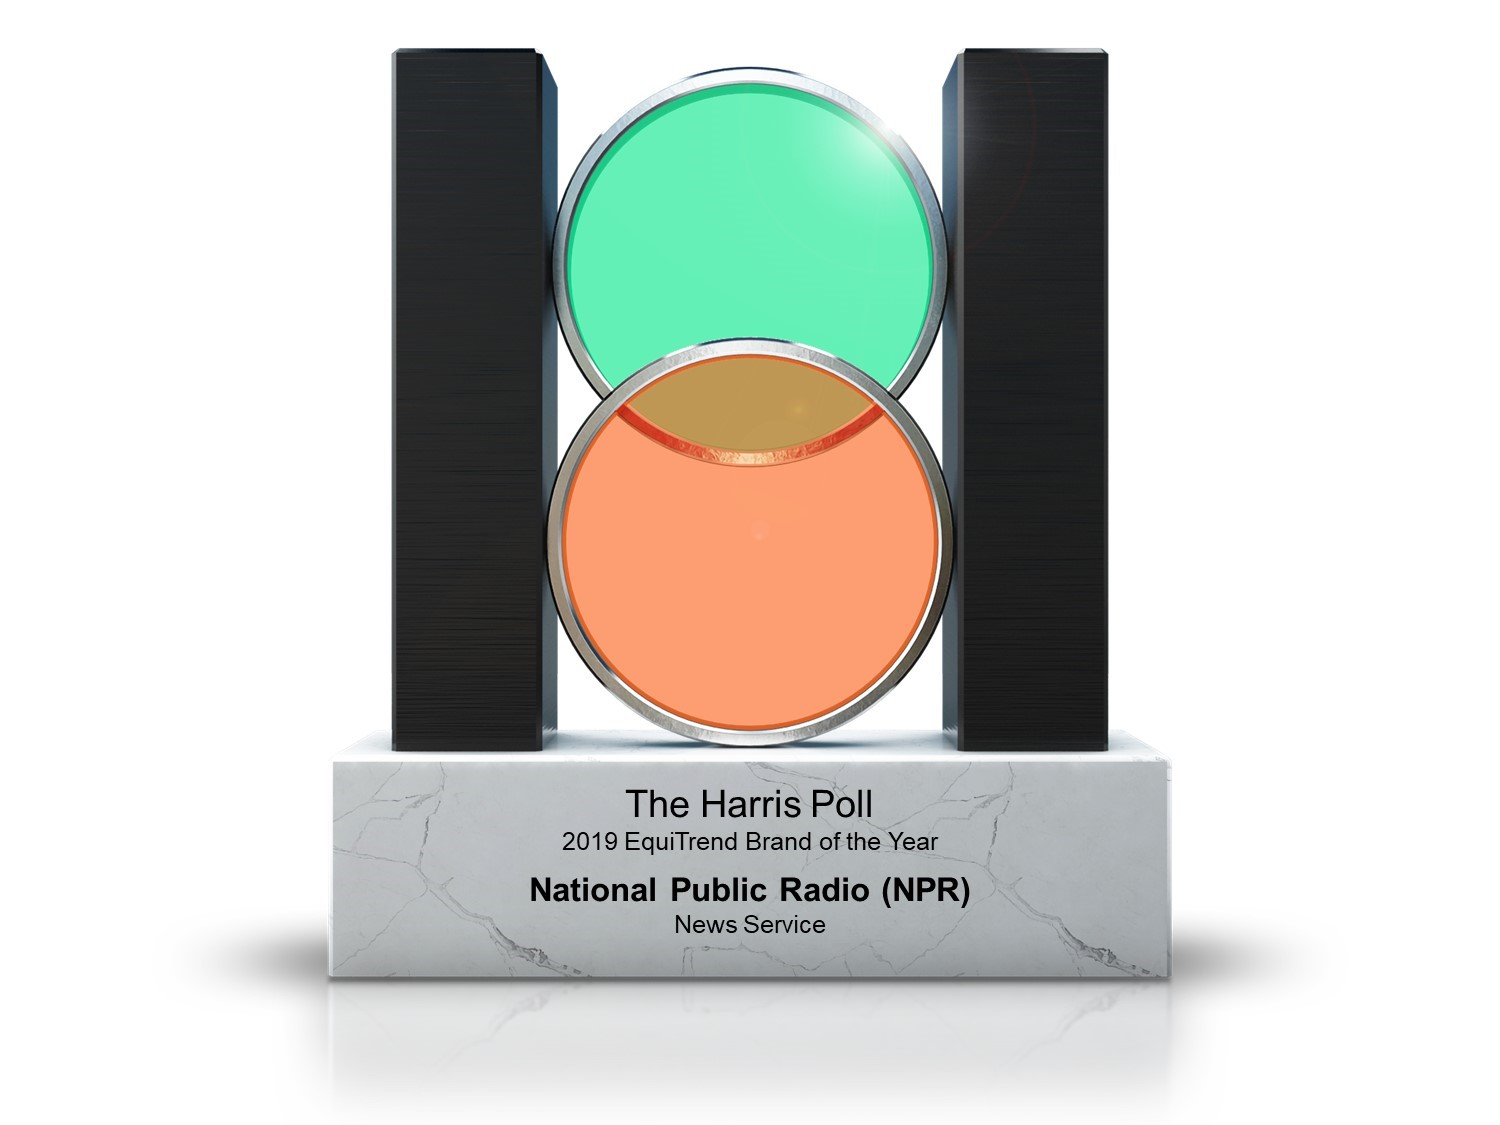 Cover image for  article: NPR is 2019 Harris Poll EquiTrend News Service Brand of the Year